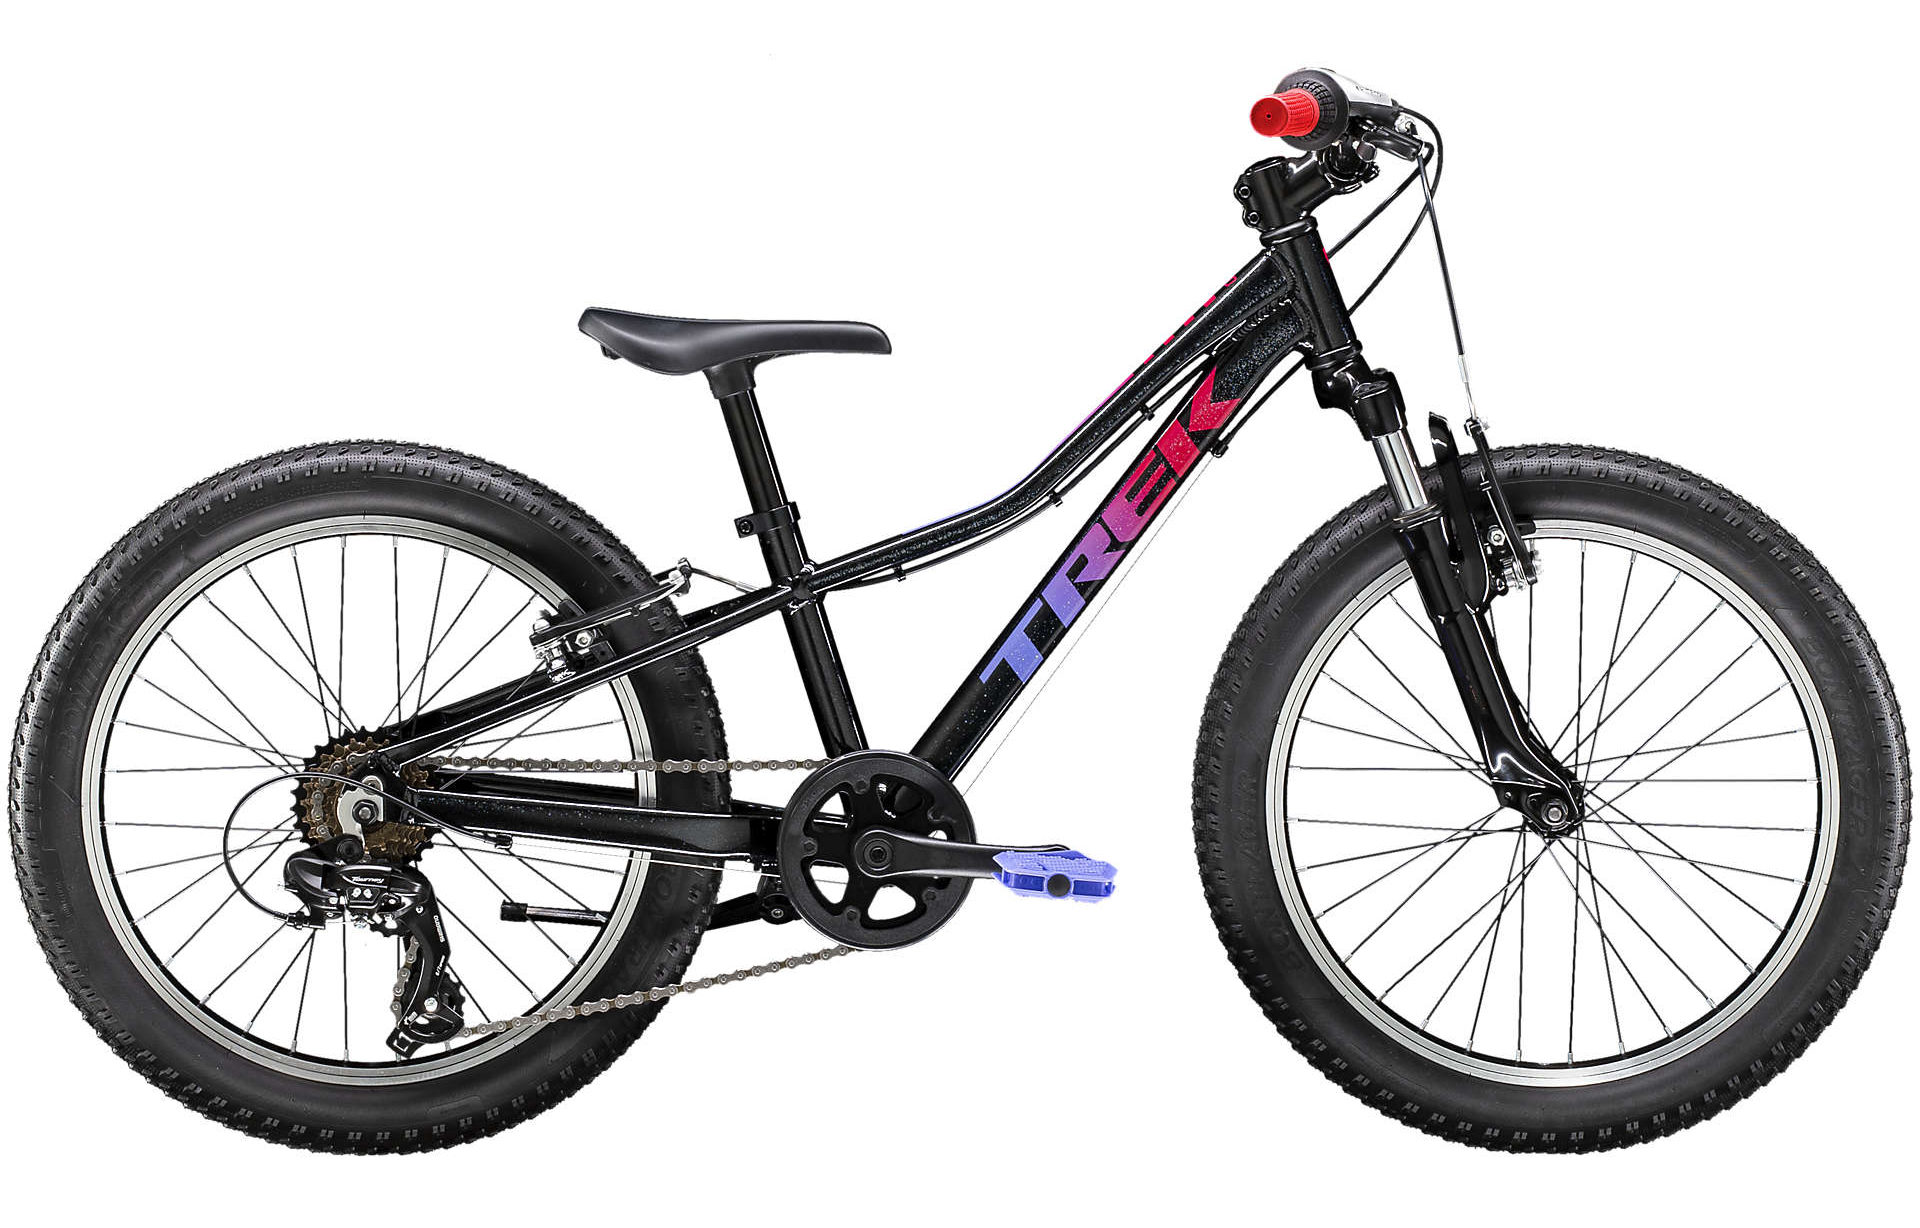 Trek dials in new Precaliber lineup with four bikes to fit kids ages 3-12